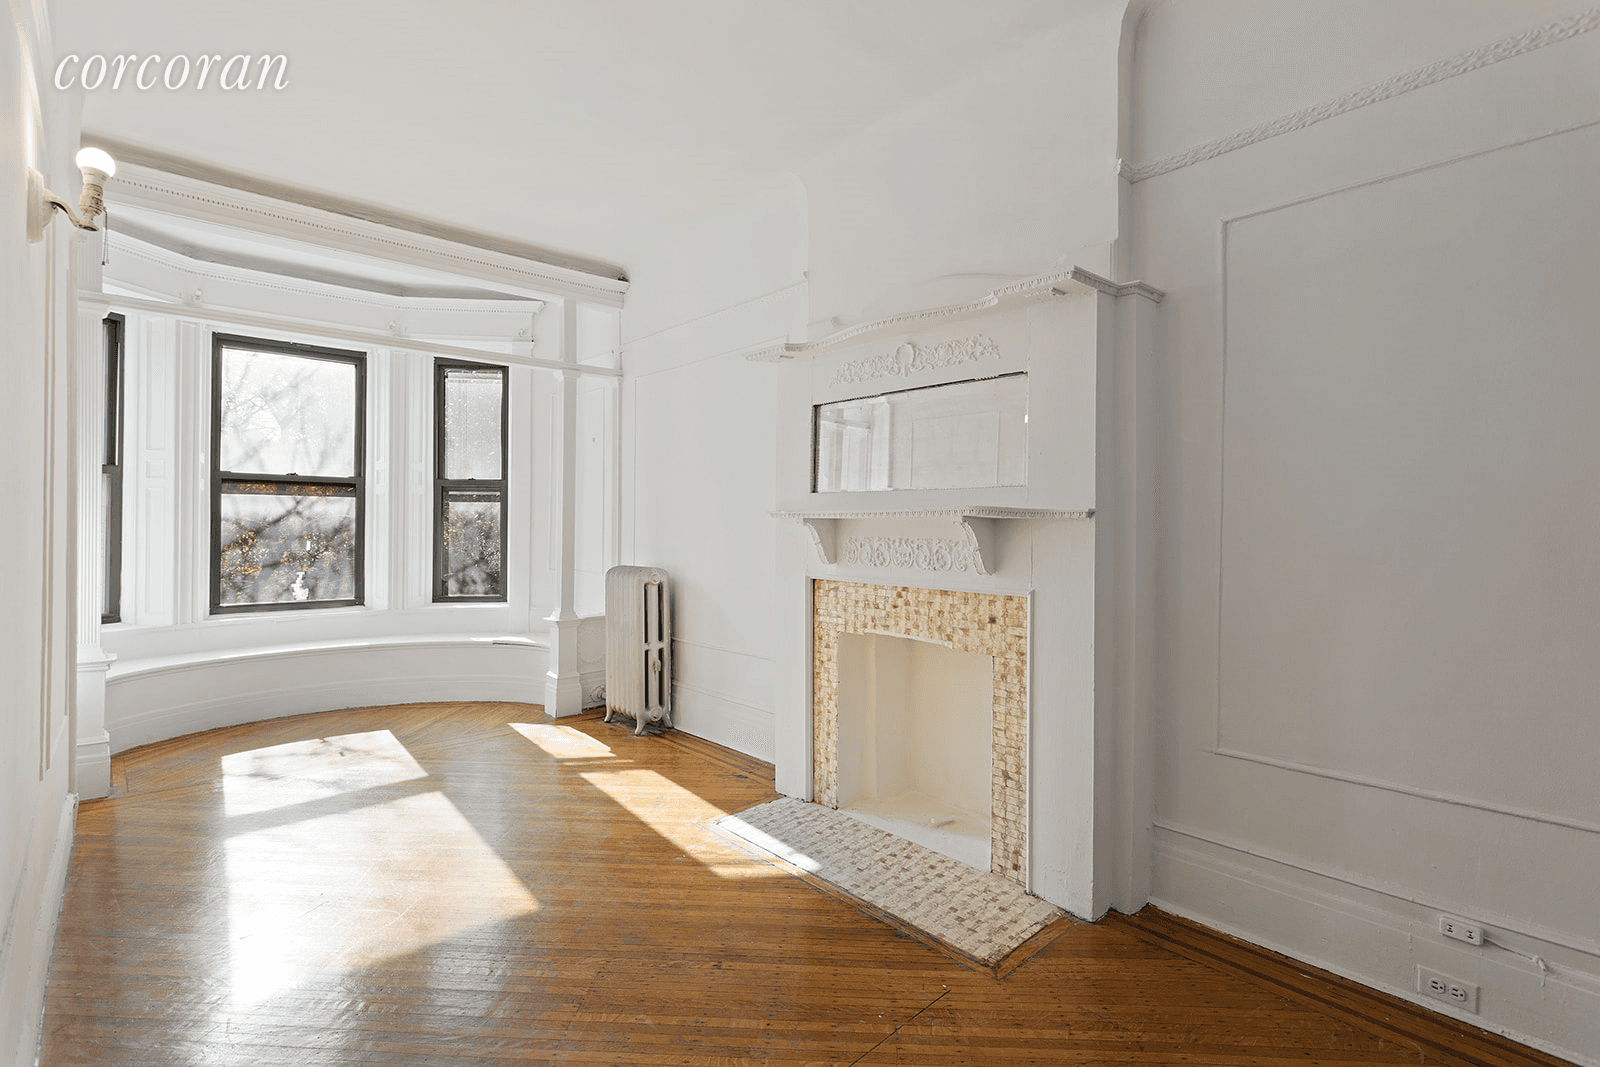 2 bedroom floor through at 231 Decatur Street, in the heart of the Stuyvesant Heights historic district, just a short stroll to Peaches, Saraghina Bakery and Skal cafe.